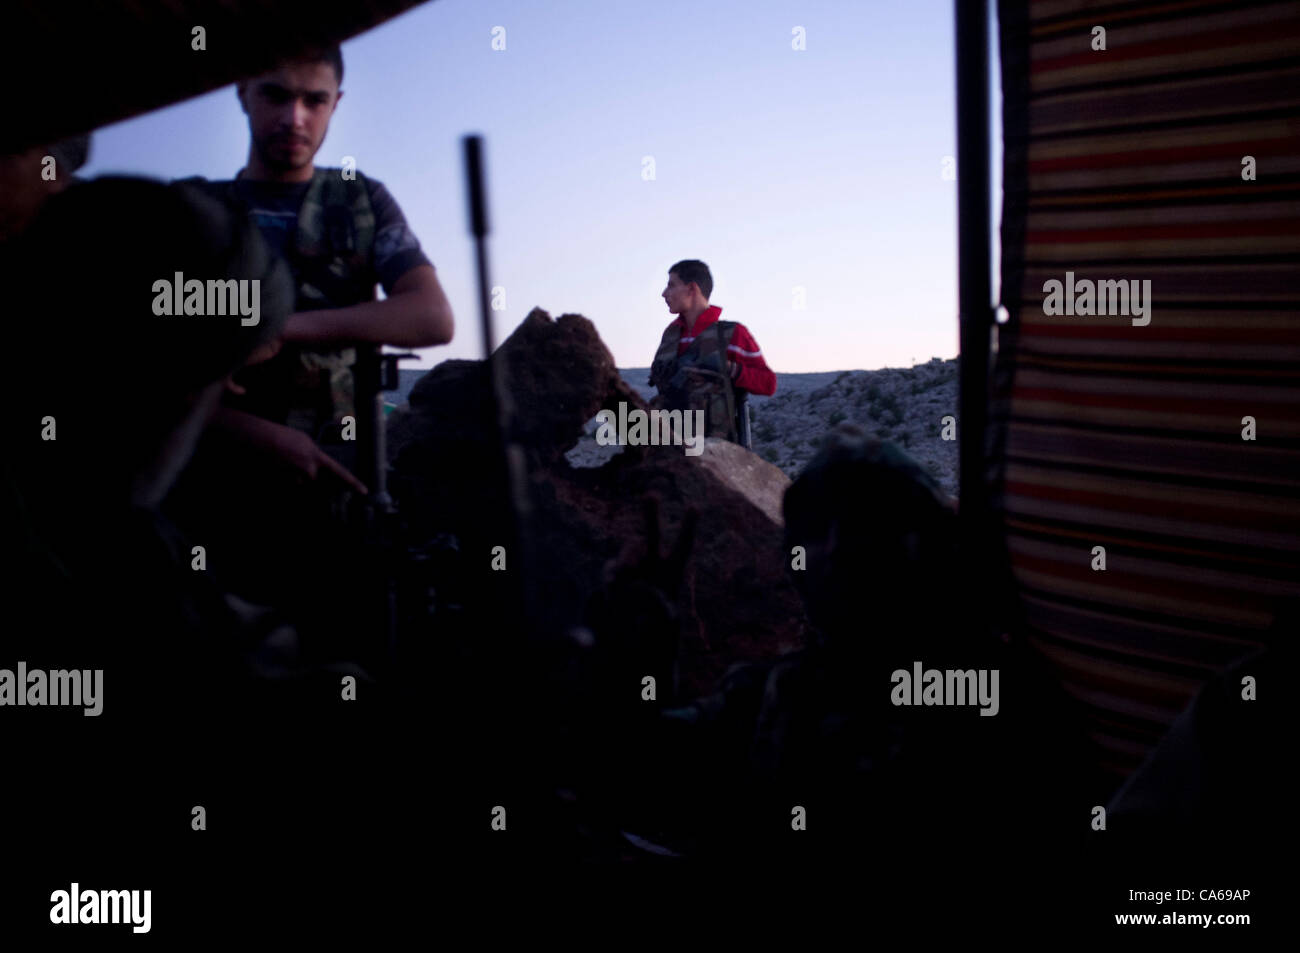 Young, FSA members man a checkpoint in the hills above Idlib.  The mountainous northern region along the border of Syria and Turkey remains a lifeline for the Free Syrian Army as weapons and supplies continue to pour across. The Syrian regime continues to amass armour and artillery in the lowlands,  Stock Photo